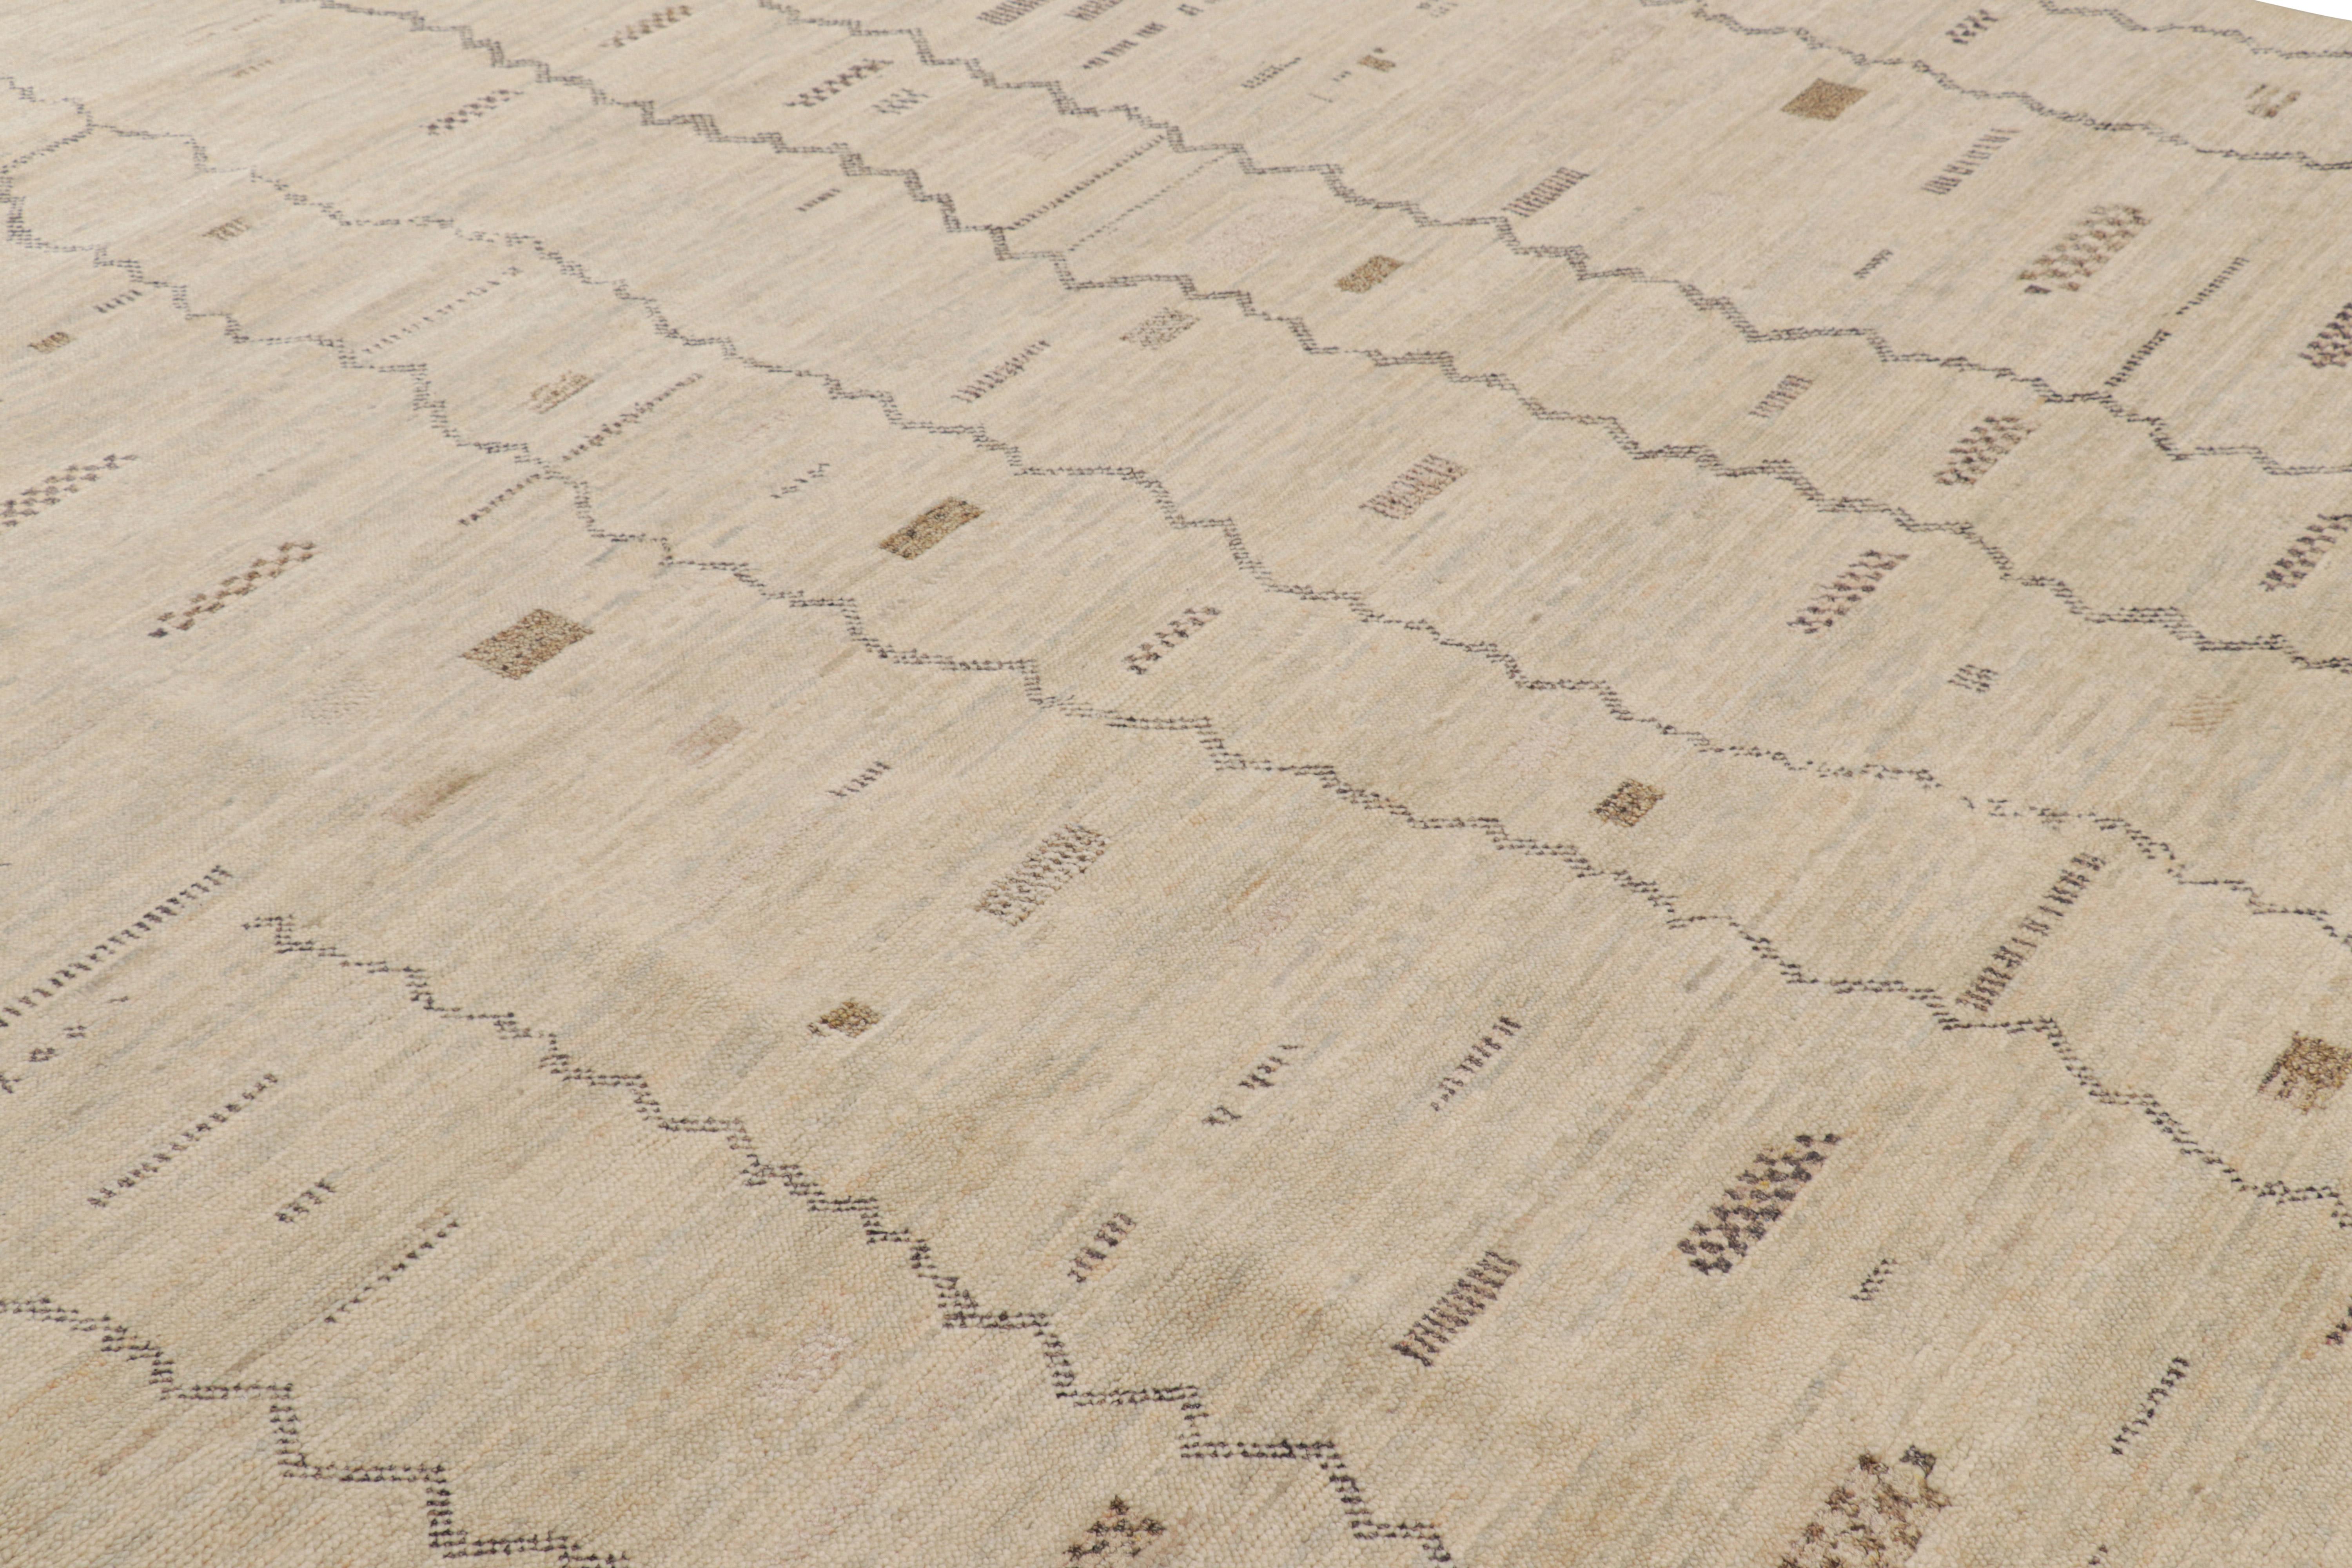 Hand-knotted in wool, this 9x12 contemporary rug from Rug & Kilim is inspired by Moroccan rugs—a reimagining primitivist Berber traditional styles in a bold modern fashion.

On the Design: 

The geometric patterns, ranging from checkered boxes to